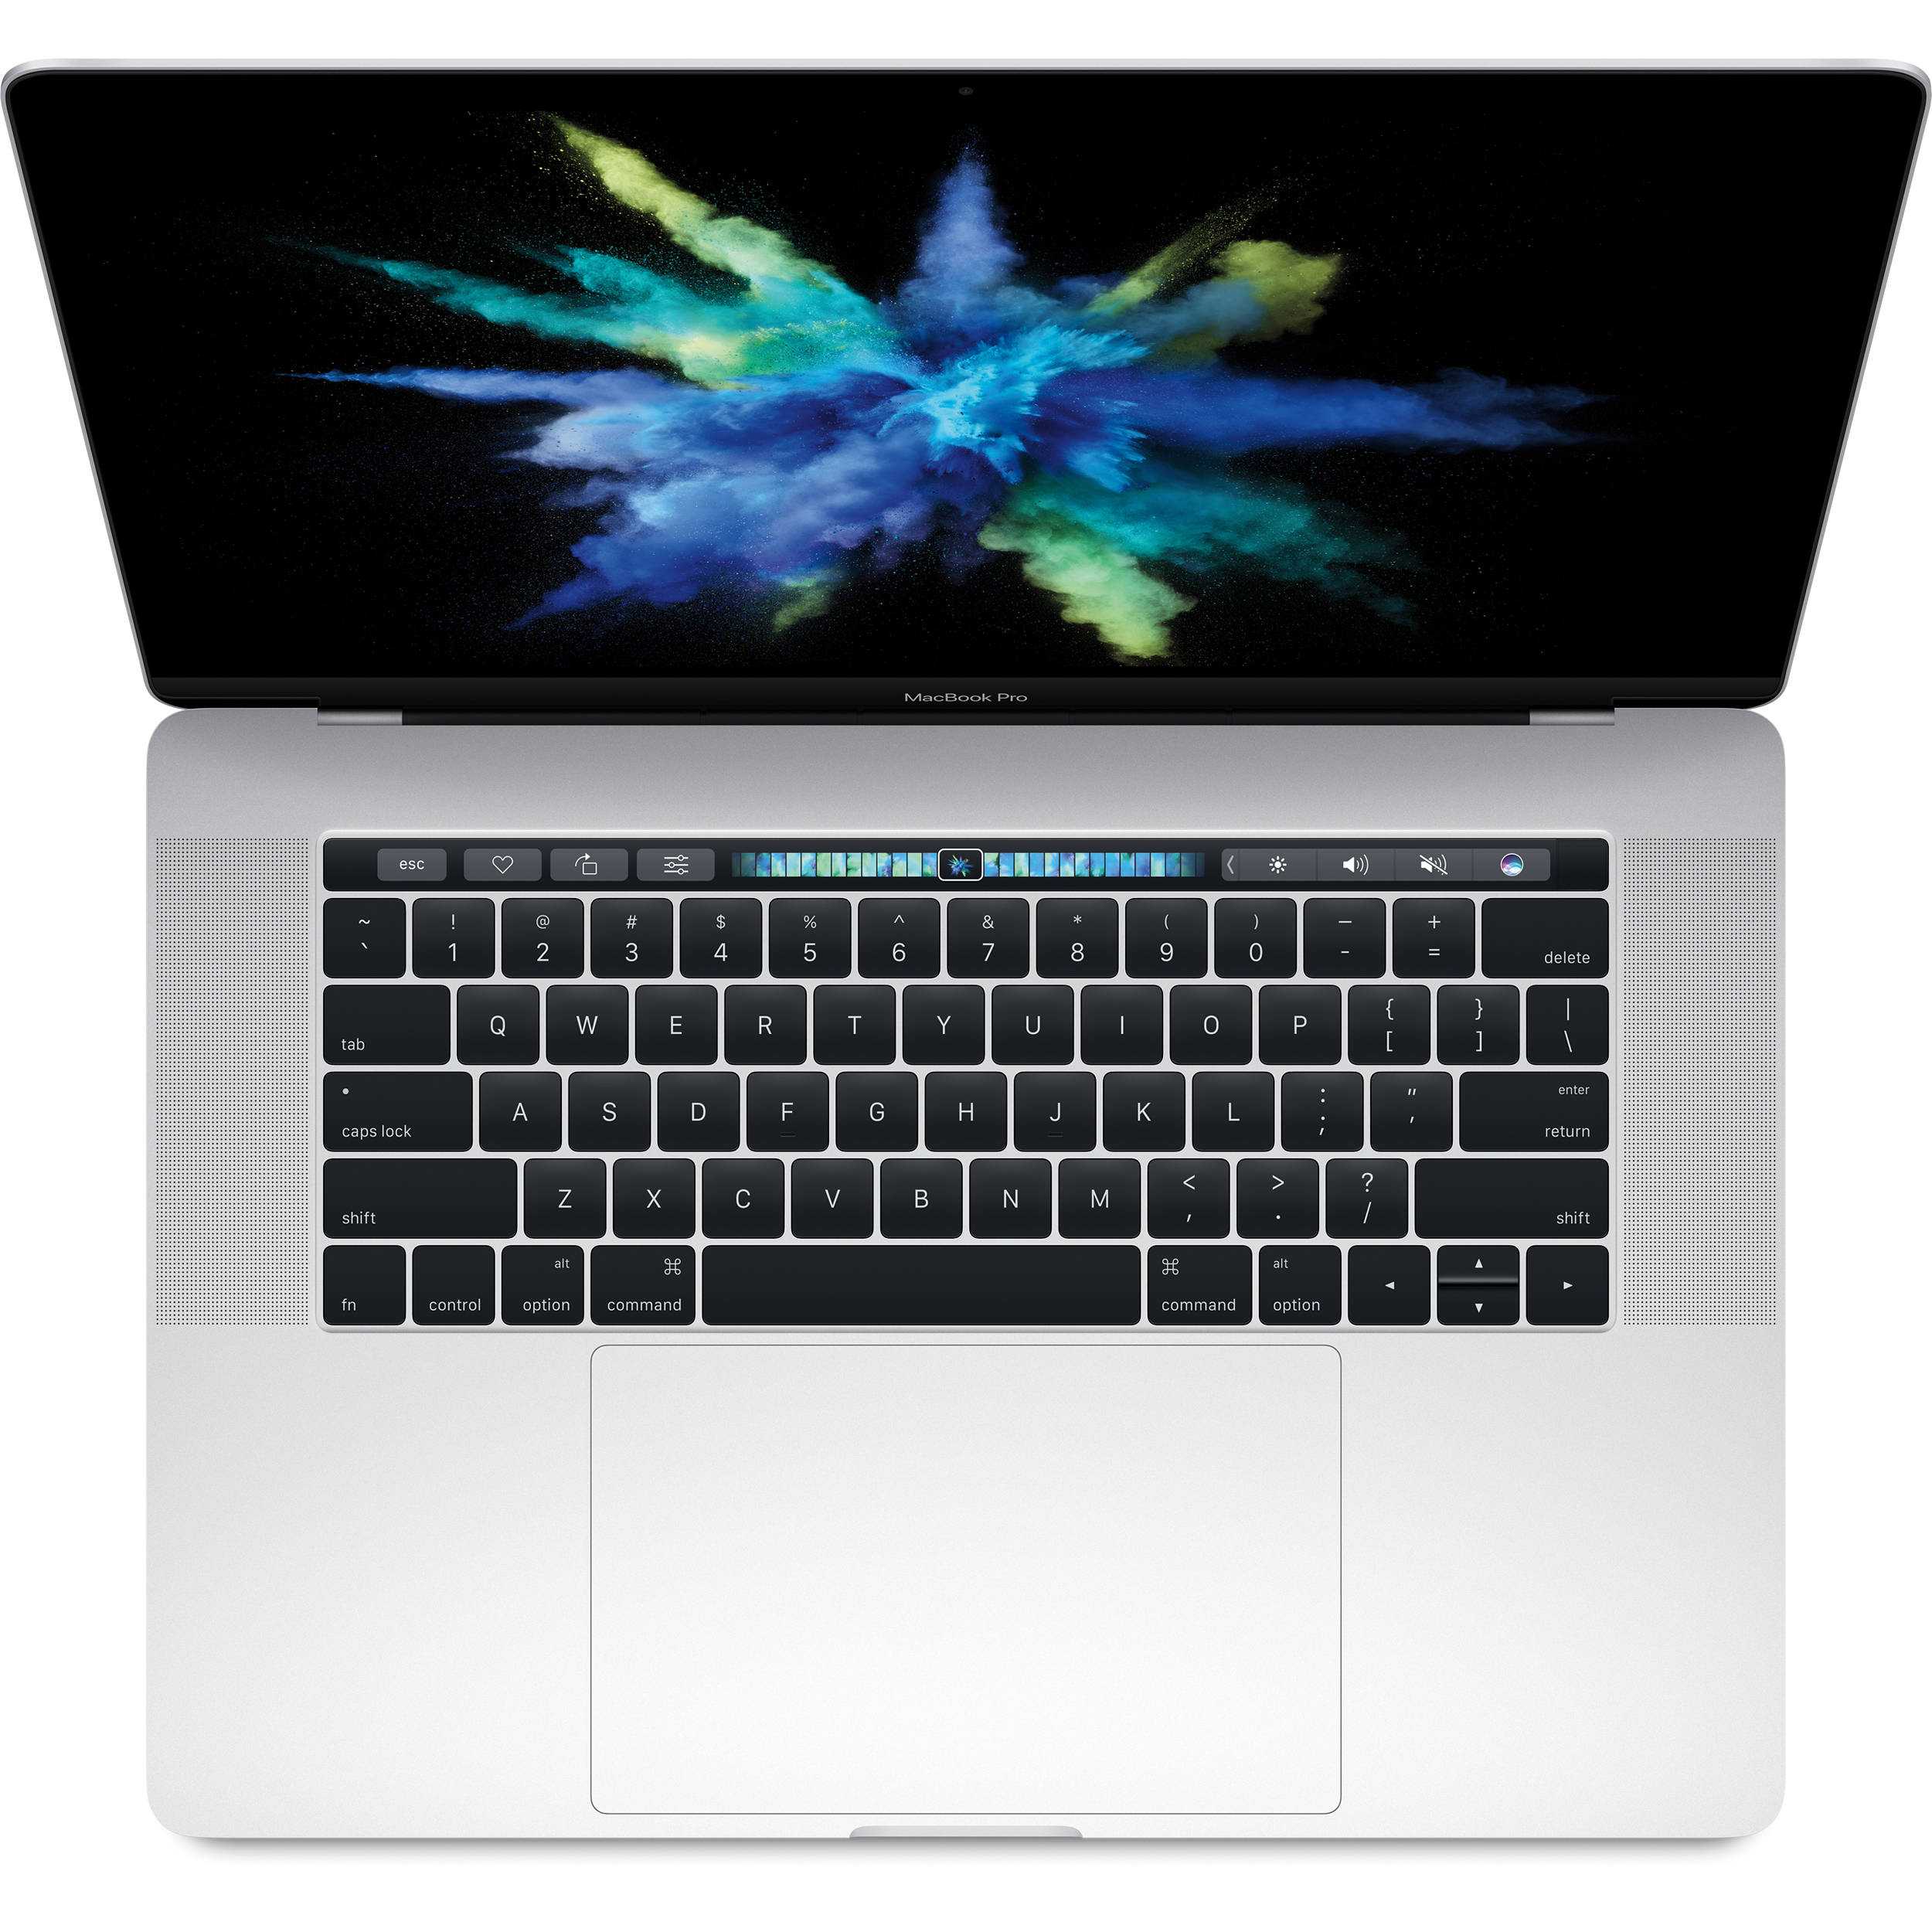 Nova Magnetic Storm Worksheet Answers as Well as Apple 15 4" Macbook Pro with touch Bar Z0t B B&h